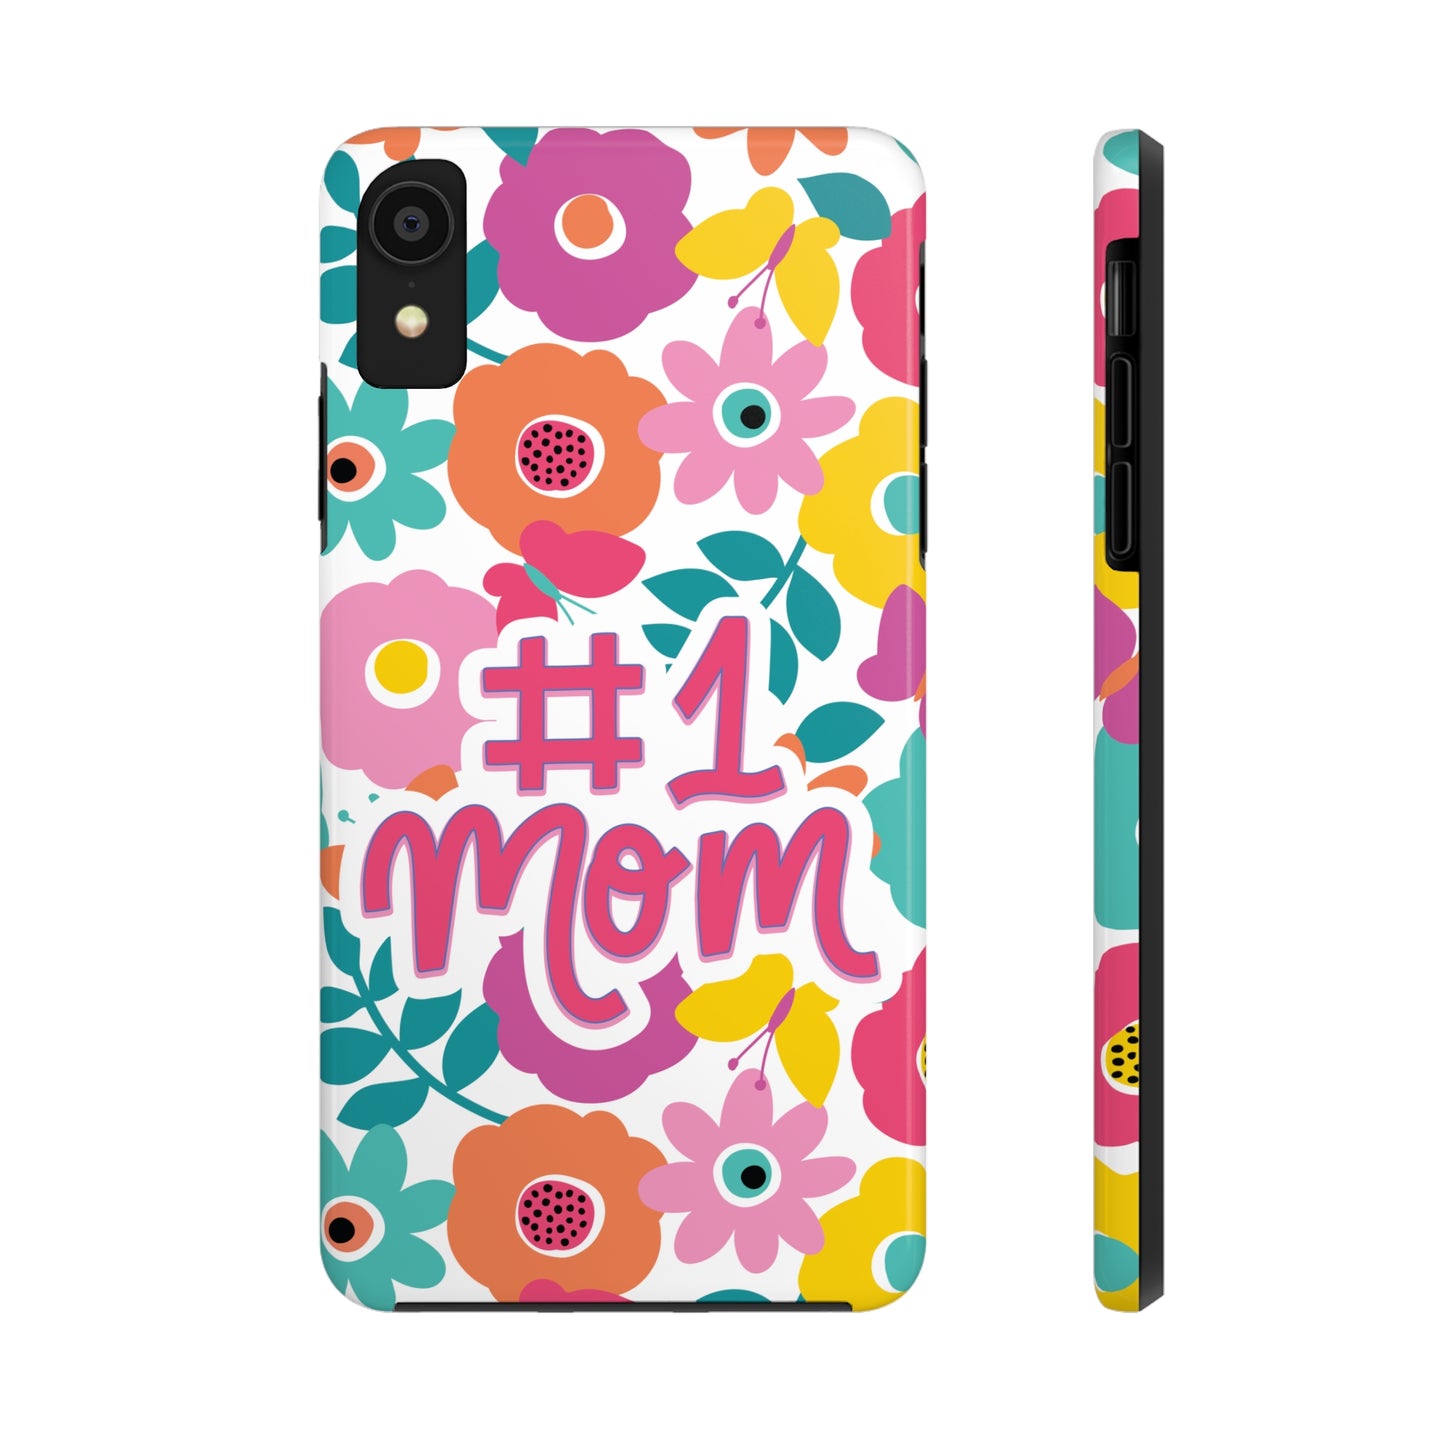 #1 Mom Floral Print Tough Phone Cases by Case-Mate, Mothers Day Gift